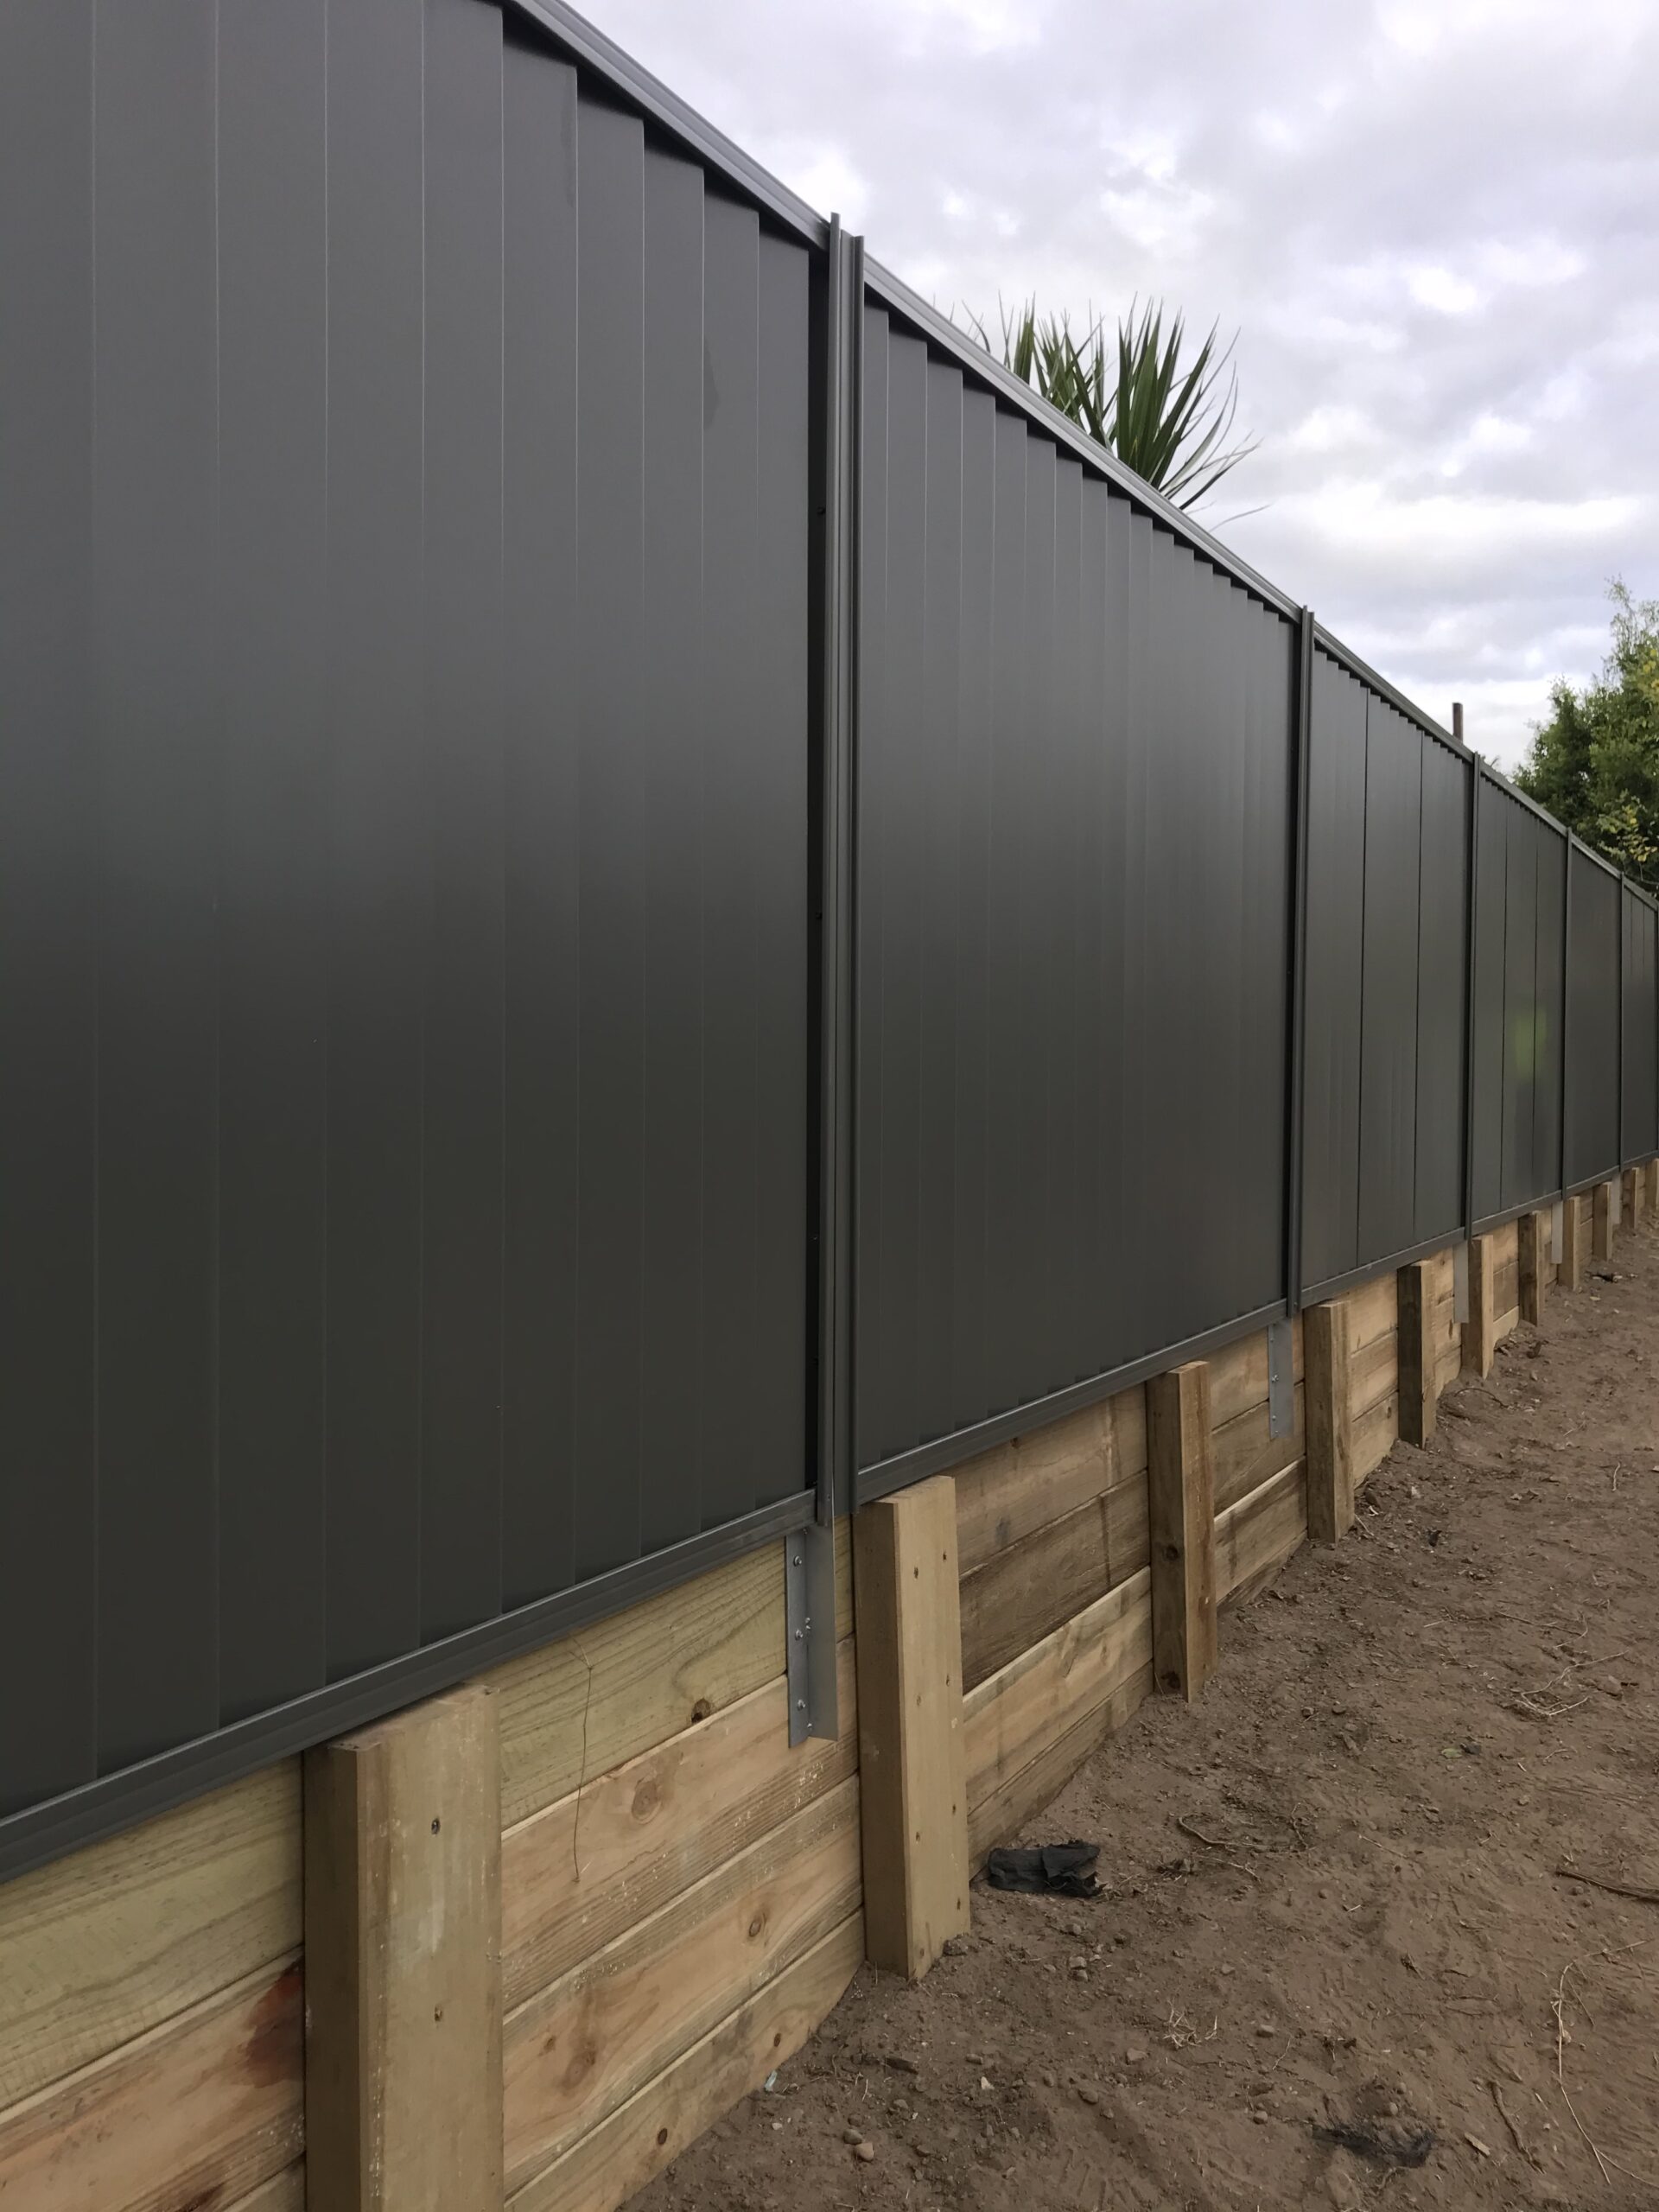 retaining-wall-colorbond-fence-builder-augustine-heights-ipswich